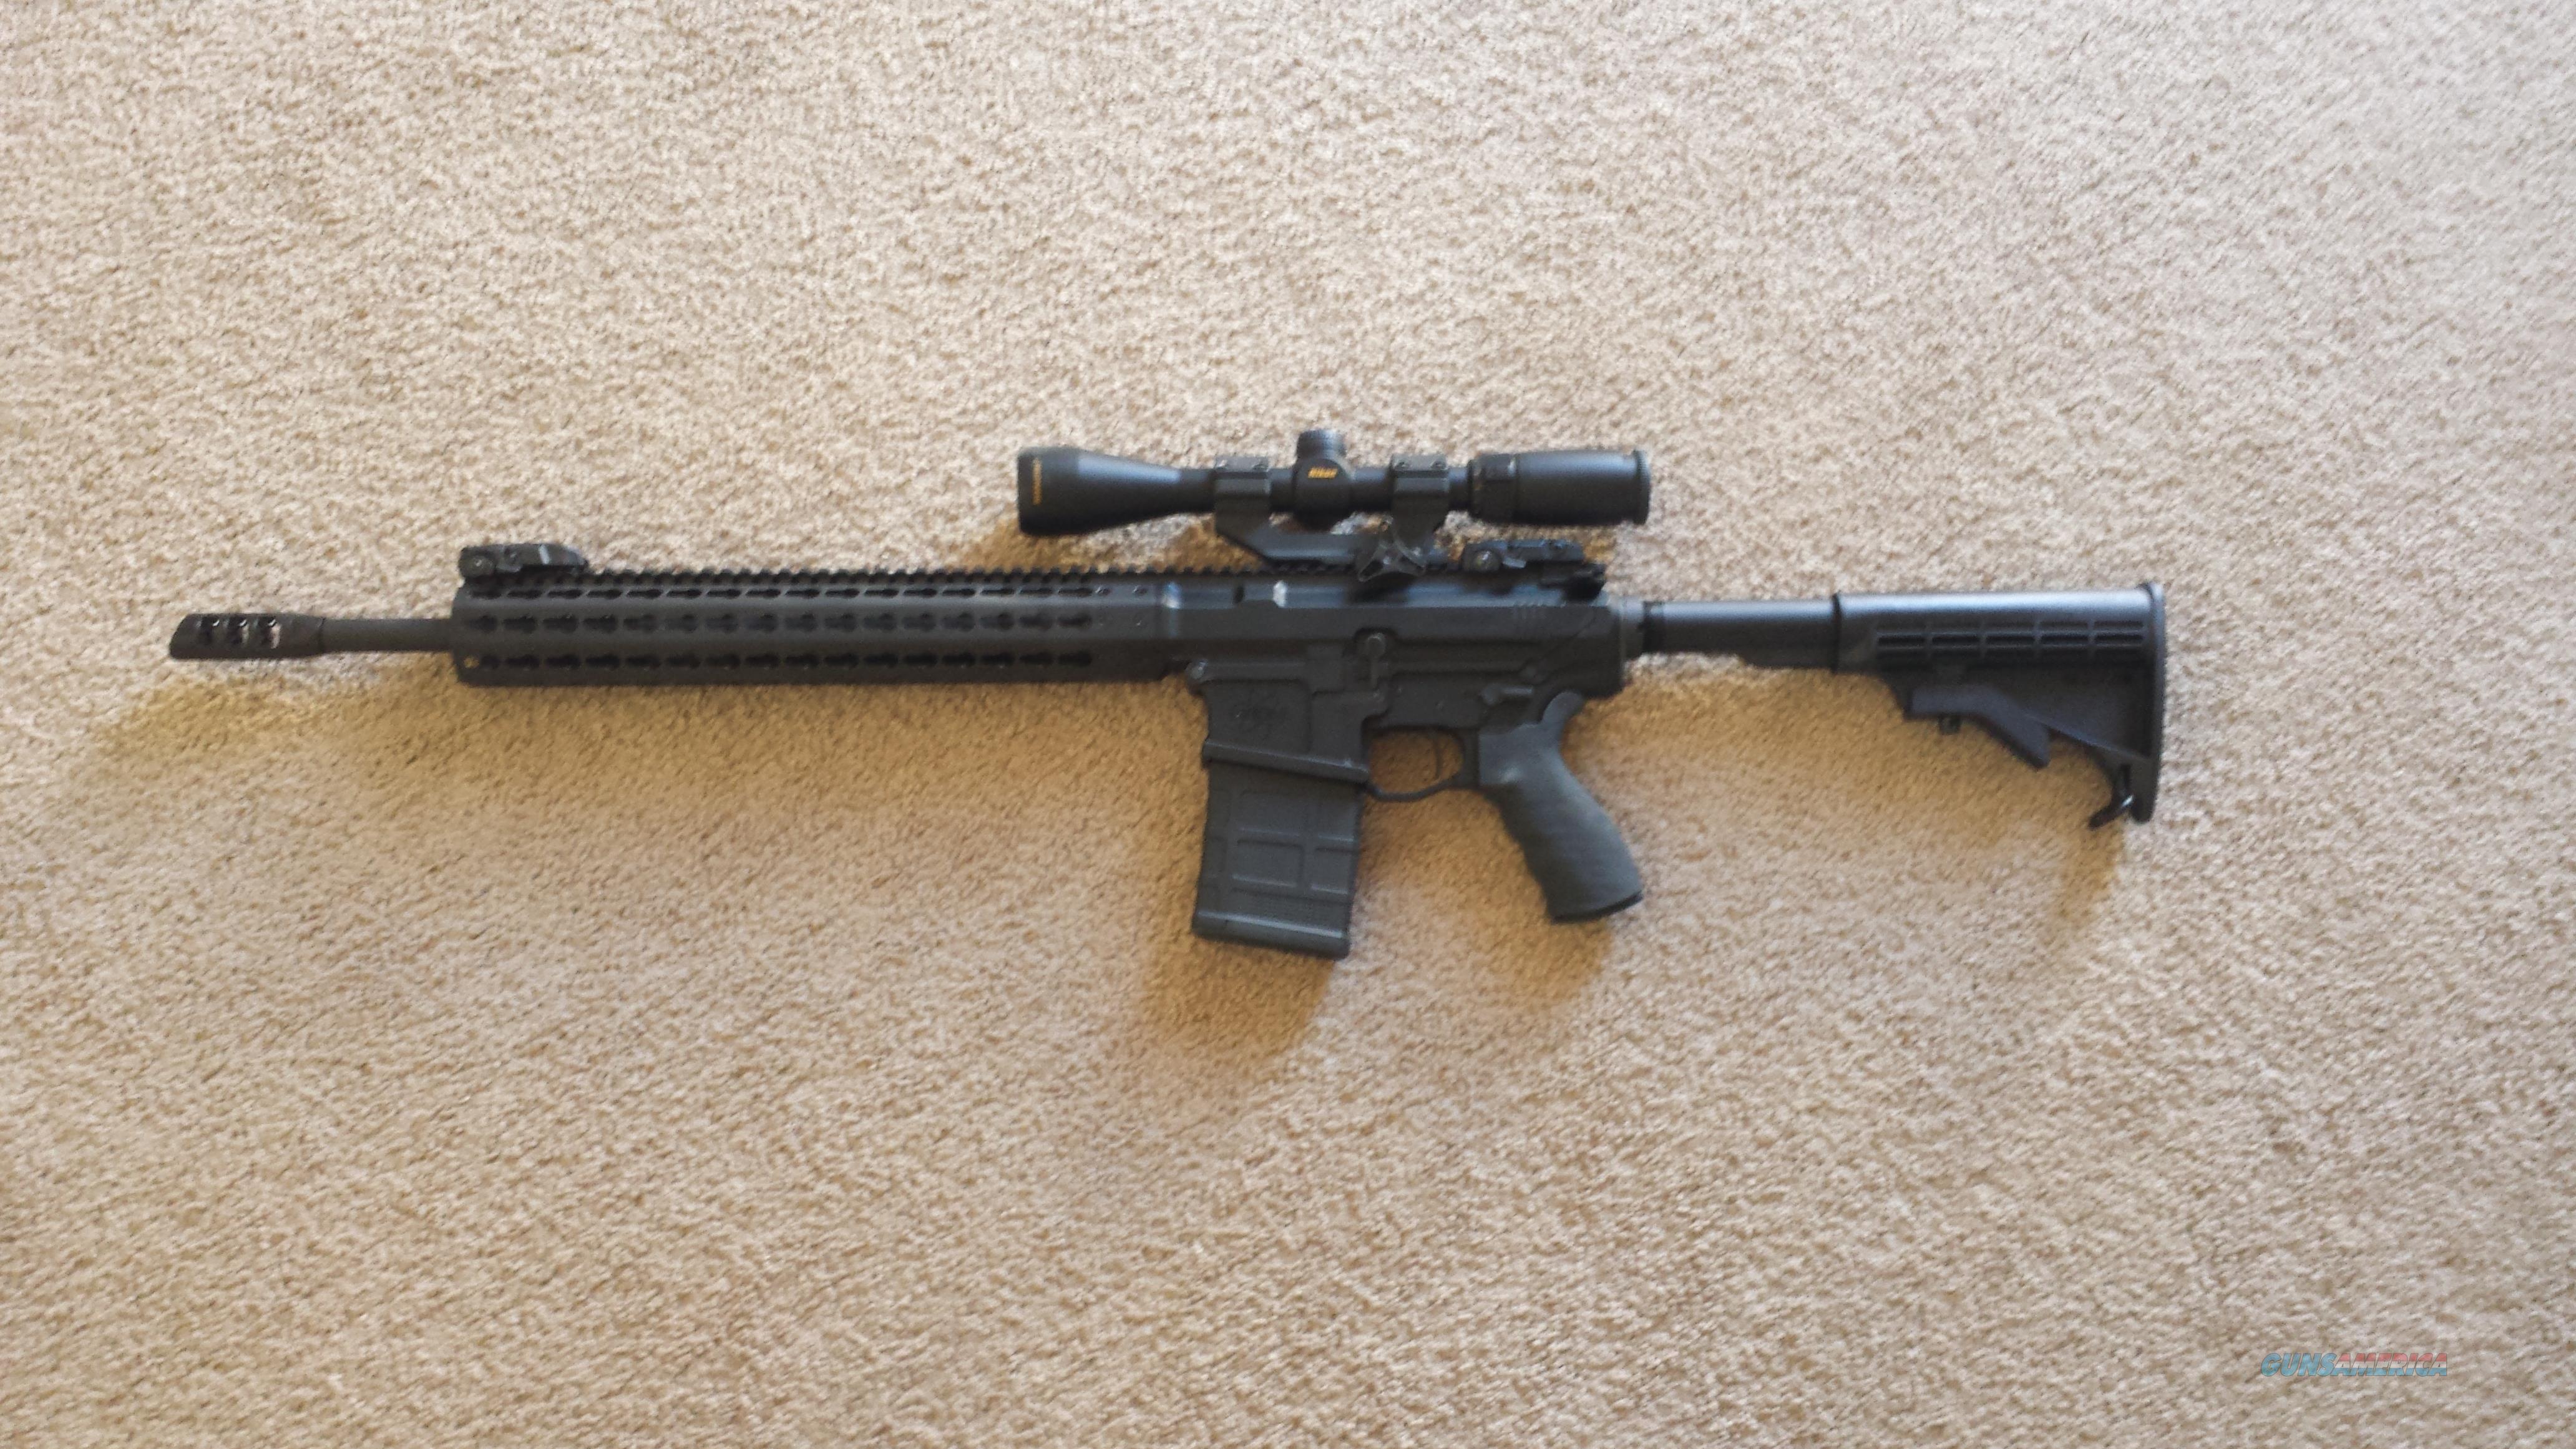 AR308 for sale at 968582830